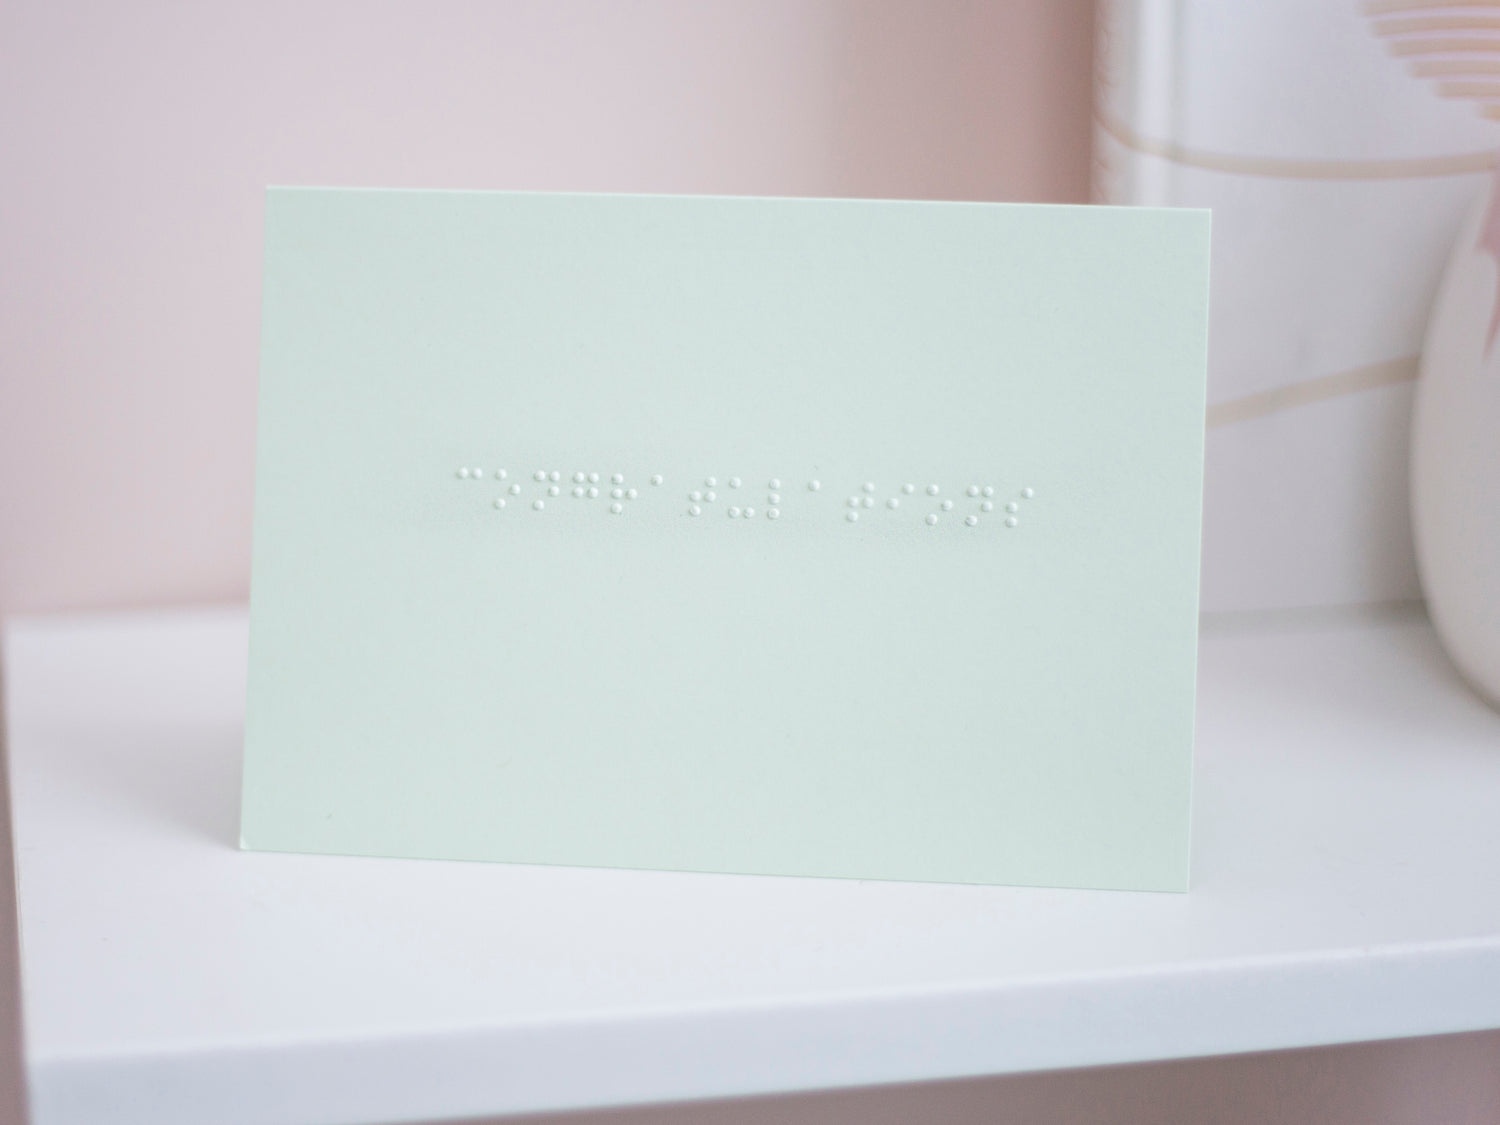 A pastel green card with congratulations written in lower case braille. The card is sat on a white shelf.